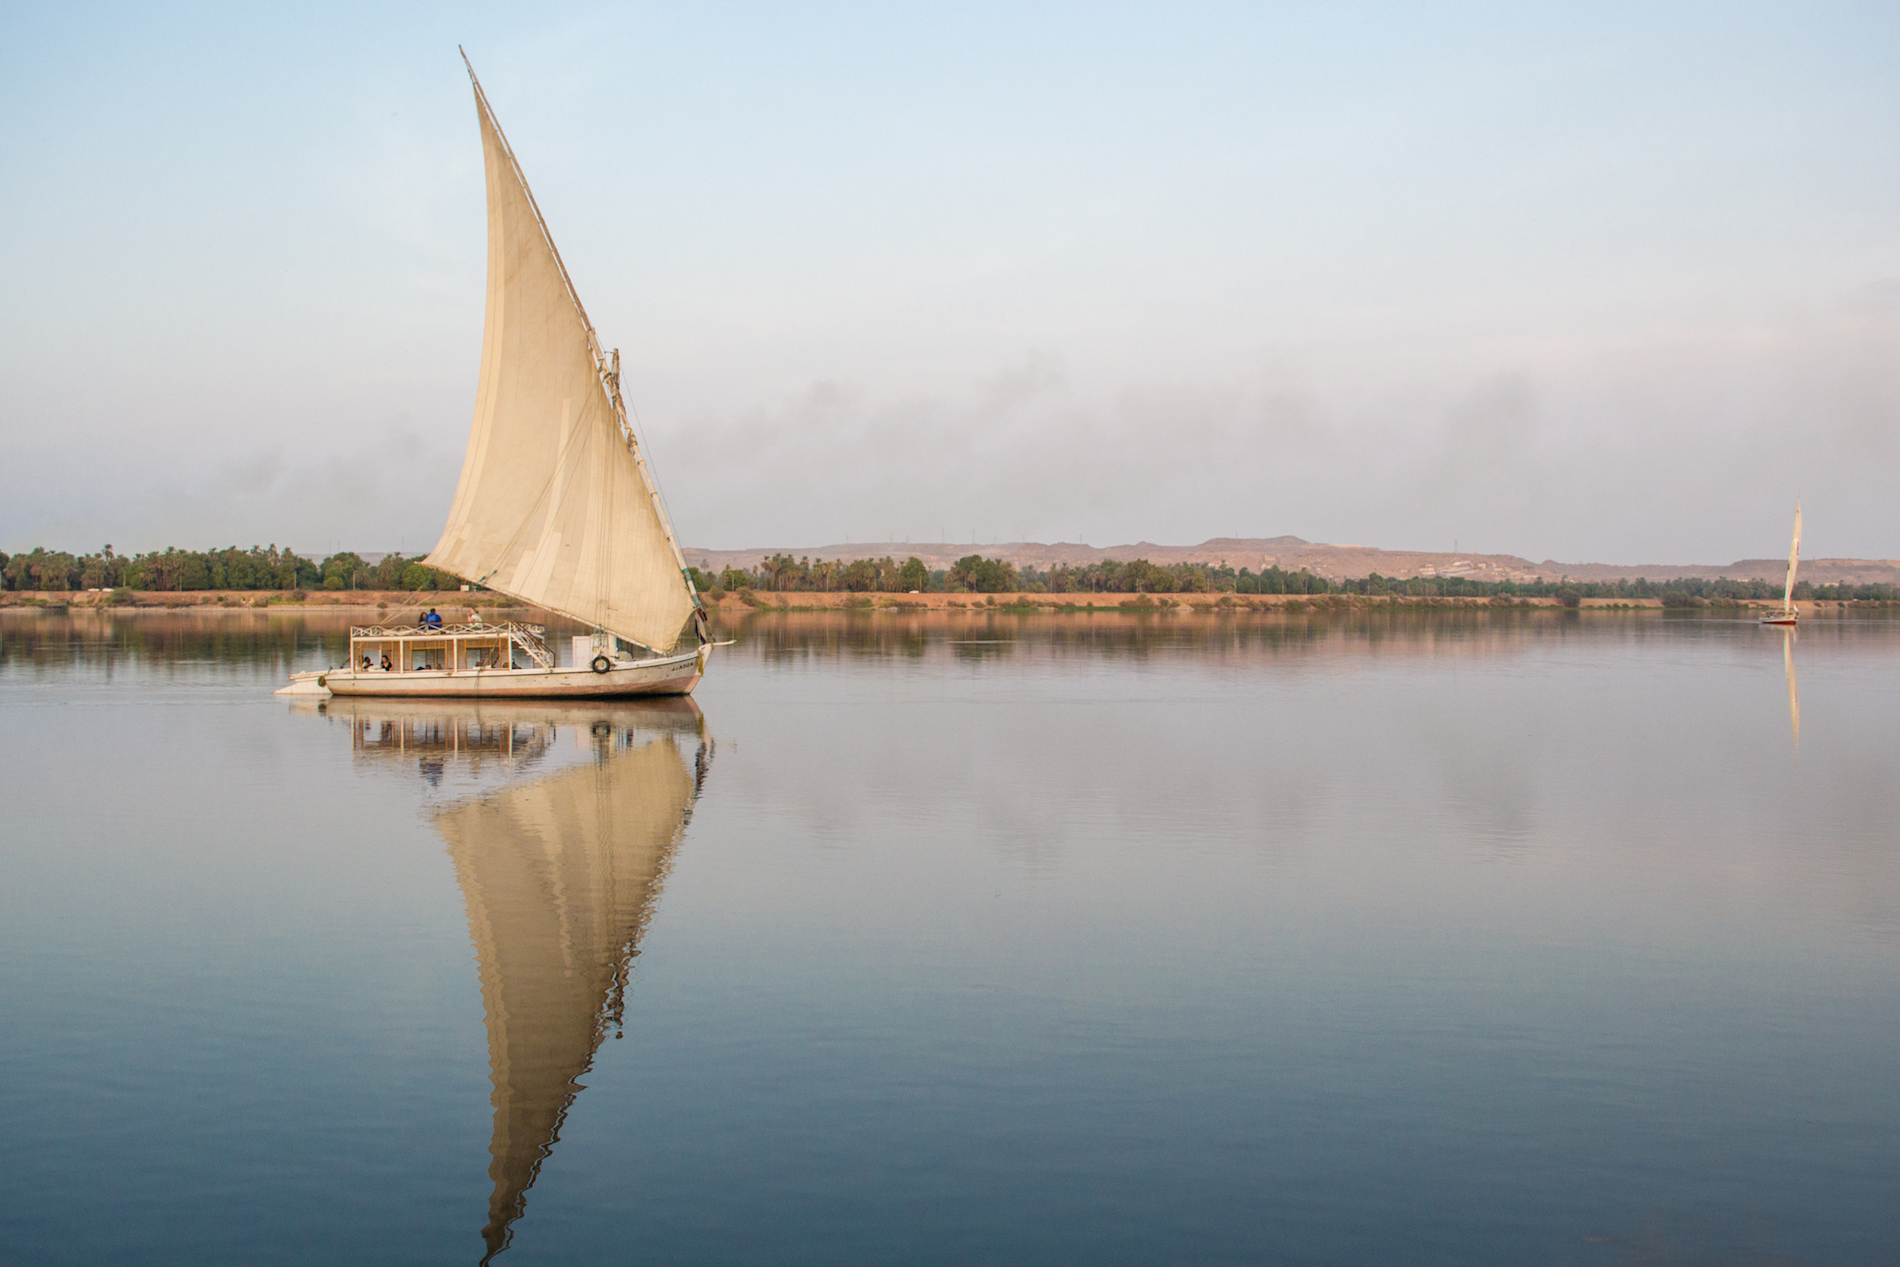 Cruising down the Nile River in a felucca.